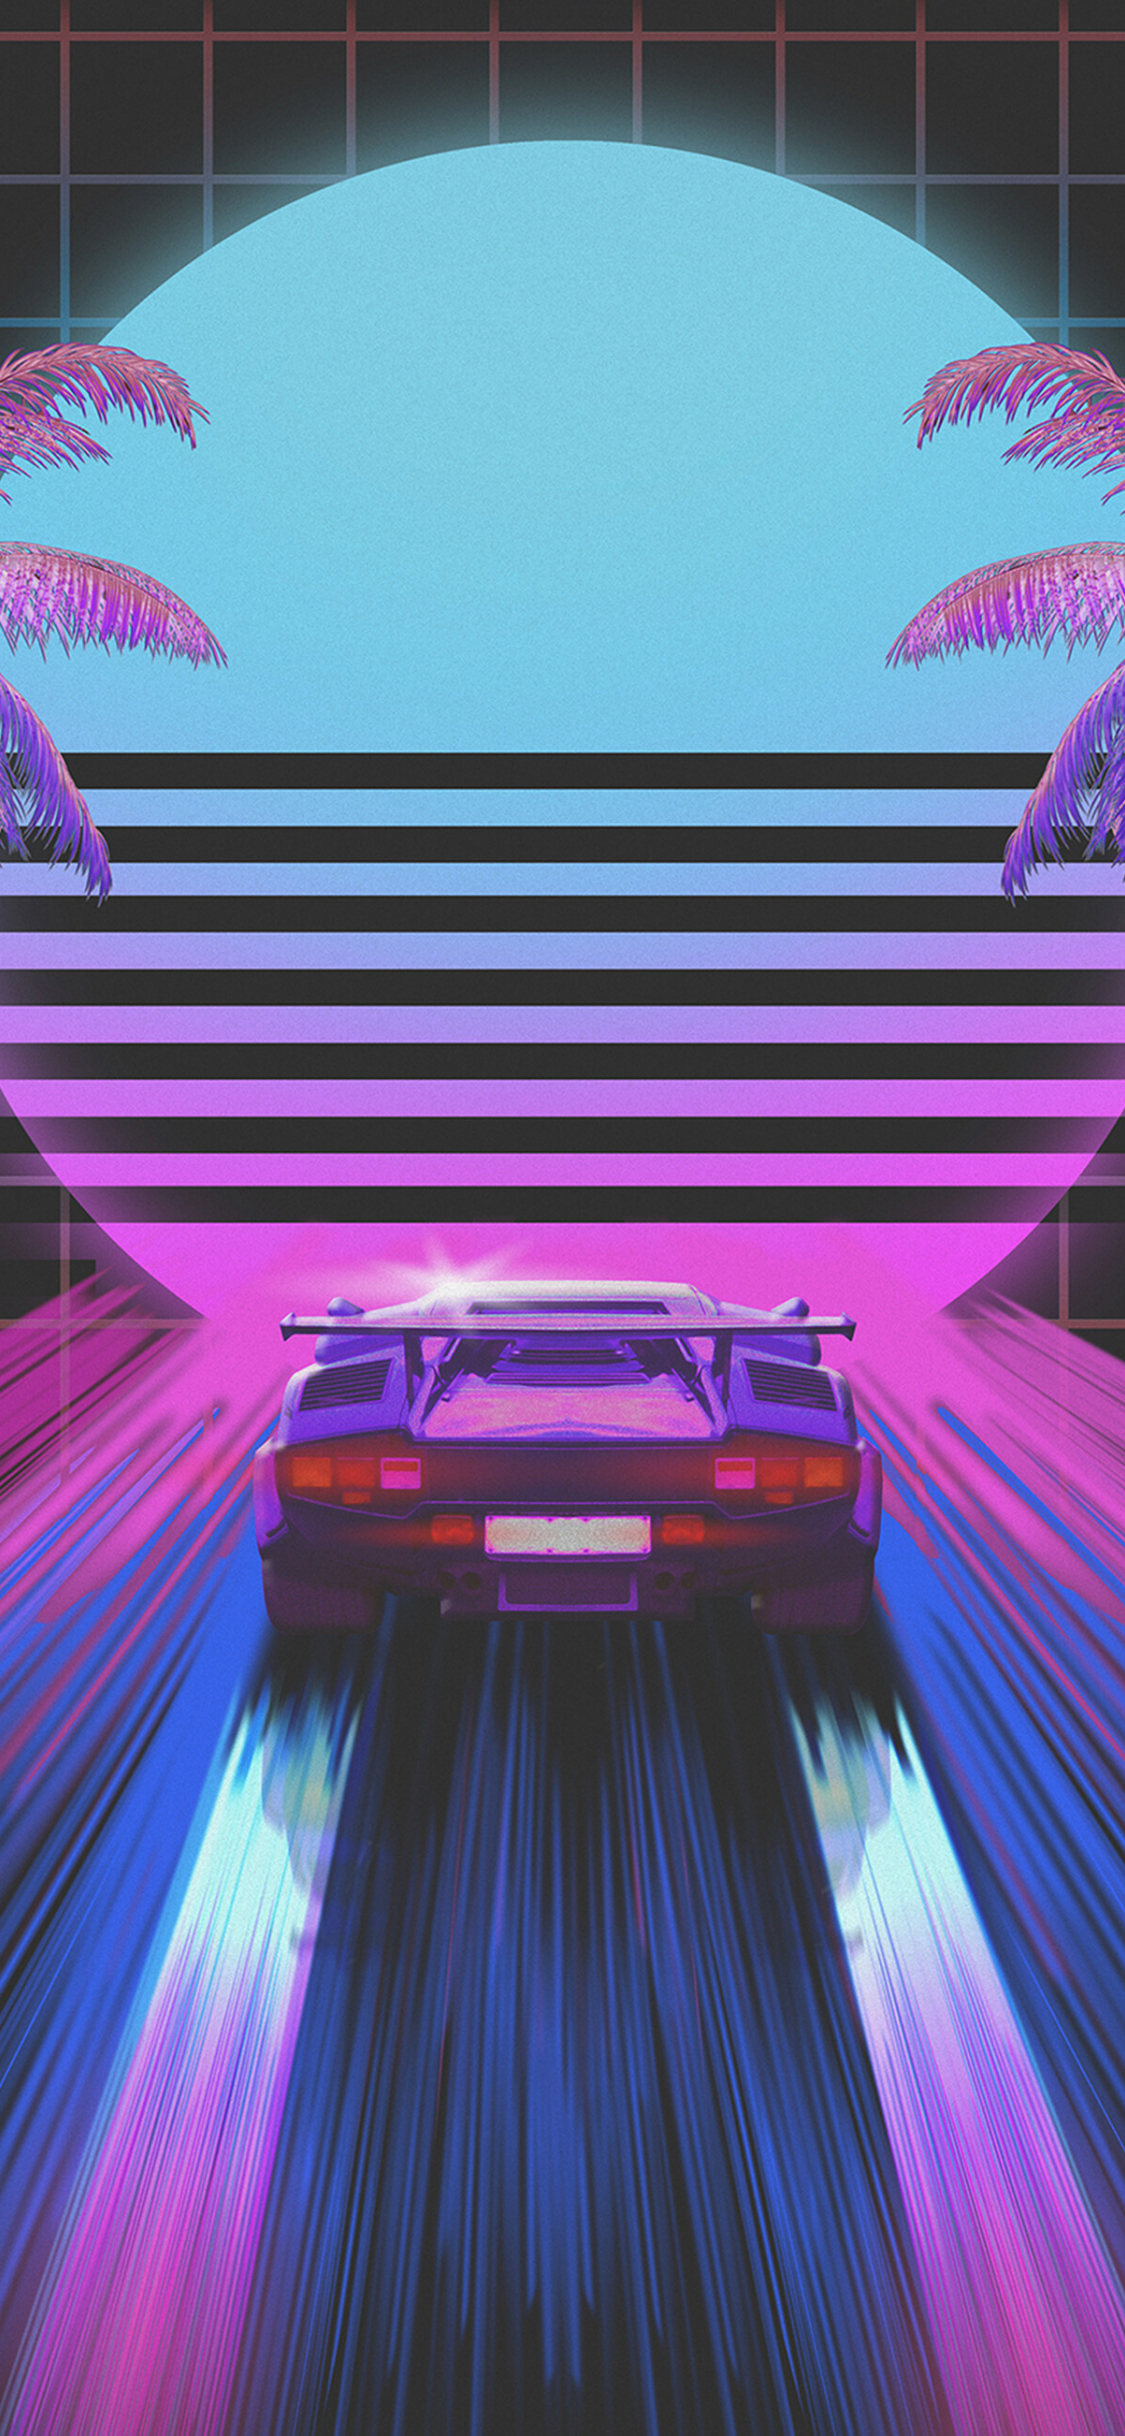 Iphone X Cars Wallpapers